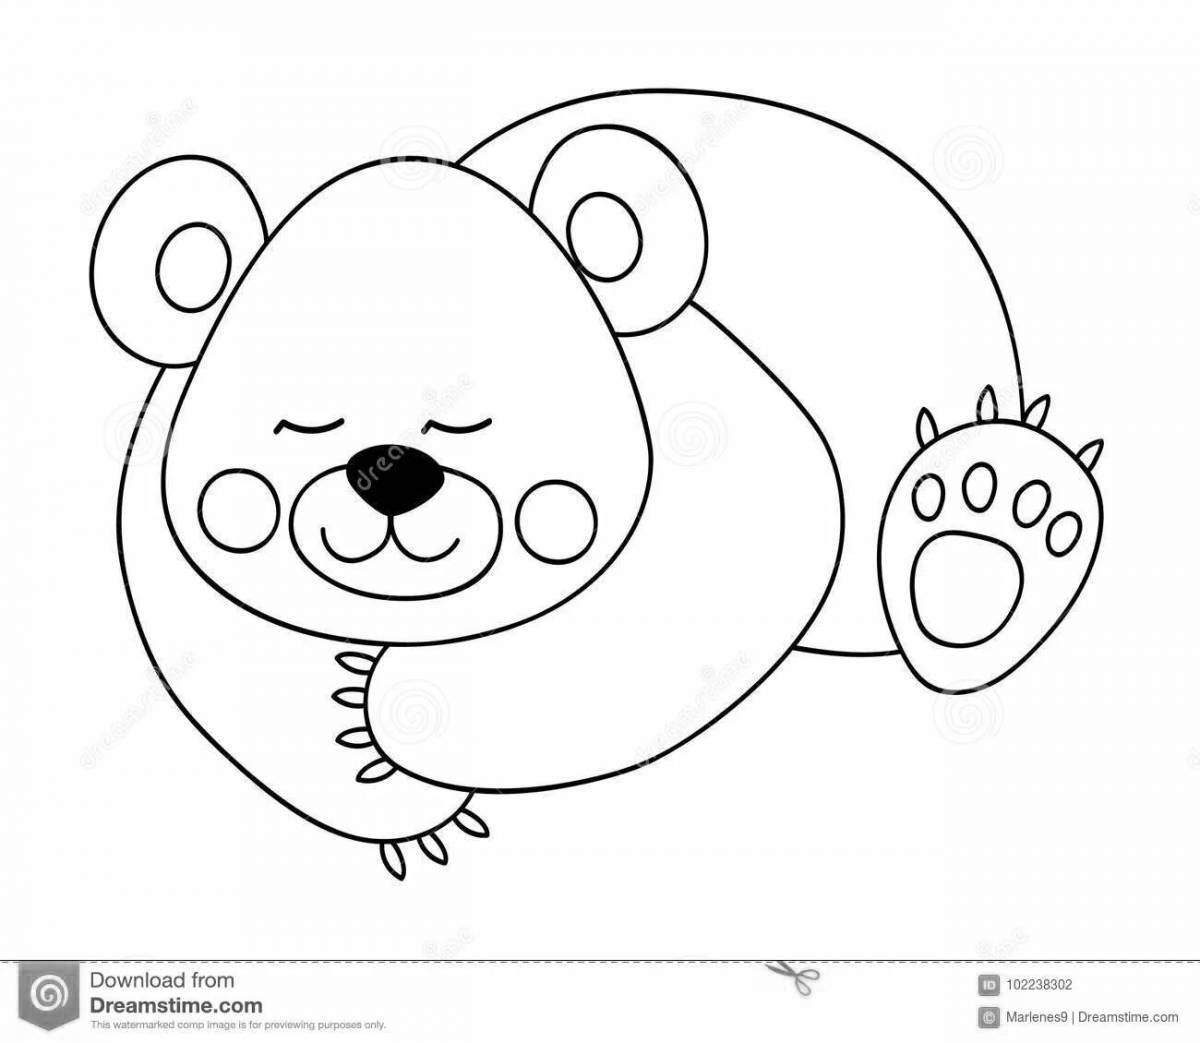 Amazing teddy bear coloring book for toddlers